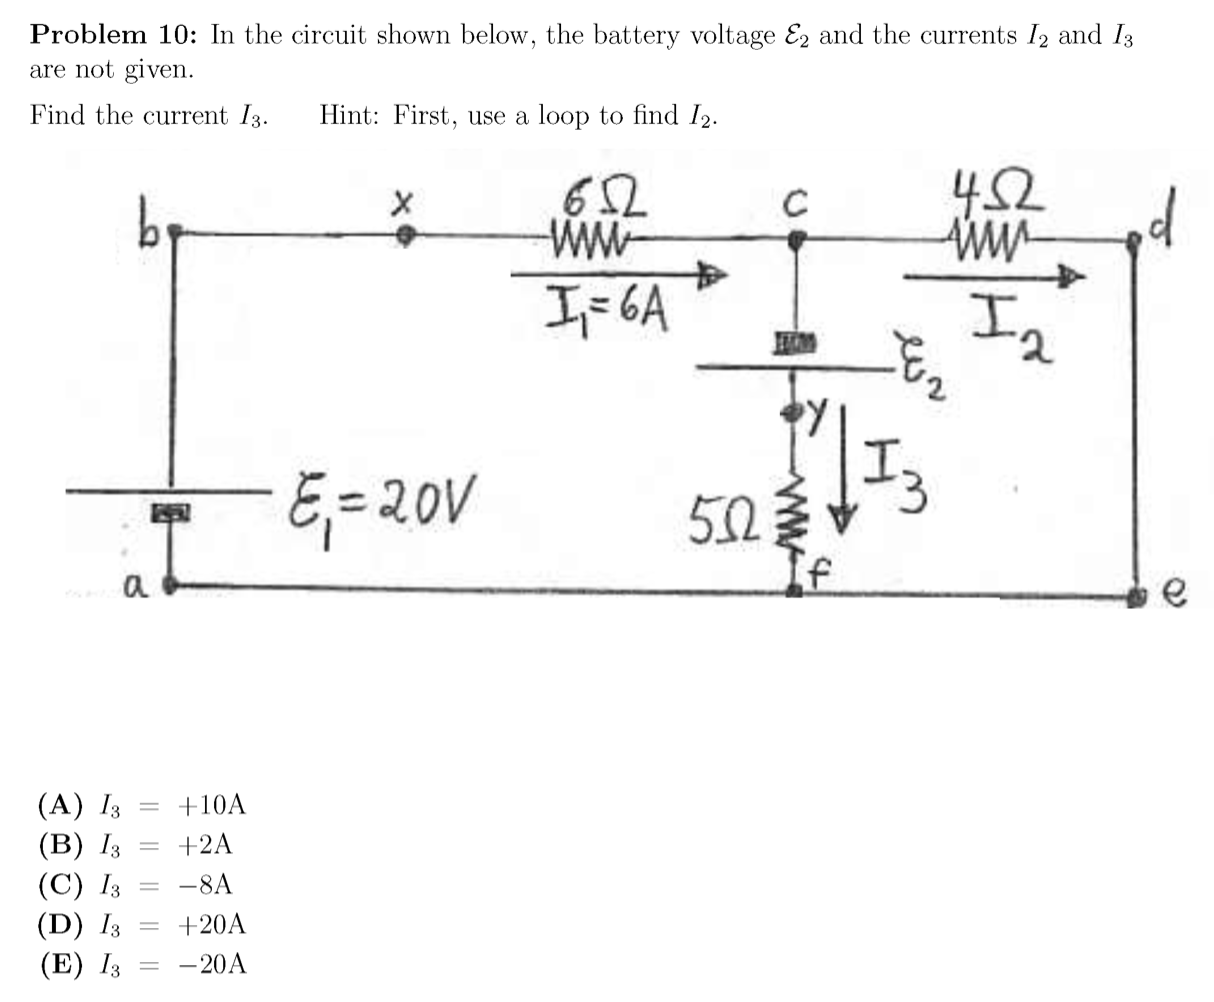 Problem 10: In the circuit shown below, the battery voltage E2 and the currents I2 and I3
are not given.
Find the current I3.
Hint: First, use a loop to find I2.
I= 6A
E;= 2.0V
52
(A) I3
+10A
(B) I3
(С) Iз
(D) Iз
(E) I3
+2A
-8A
+20A
-20A
ew
